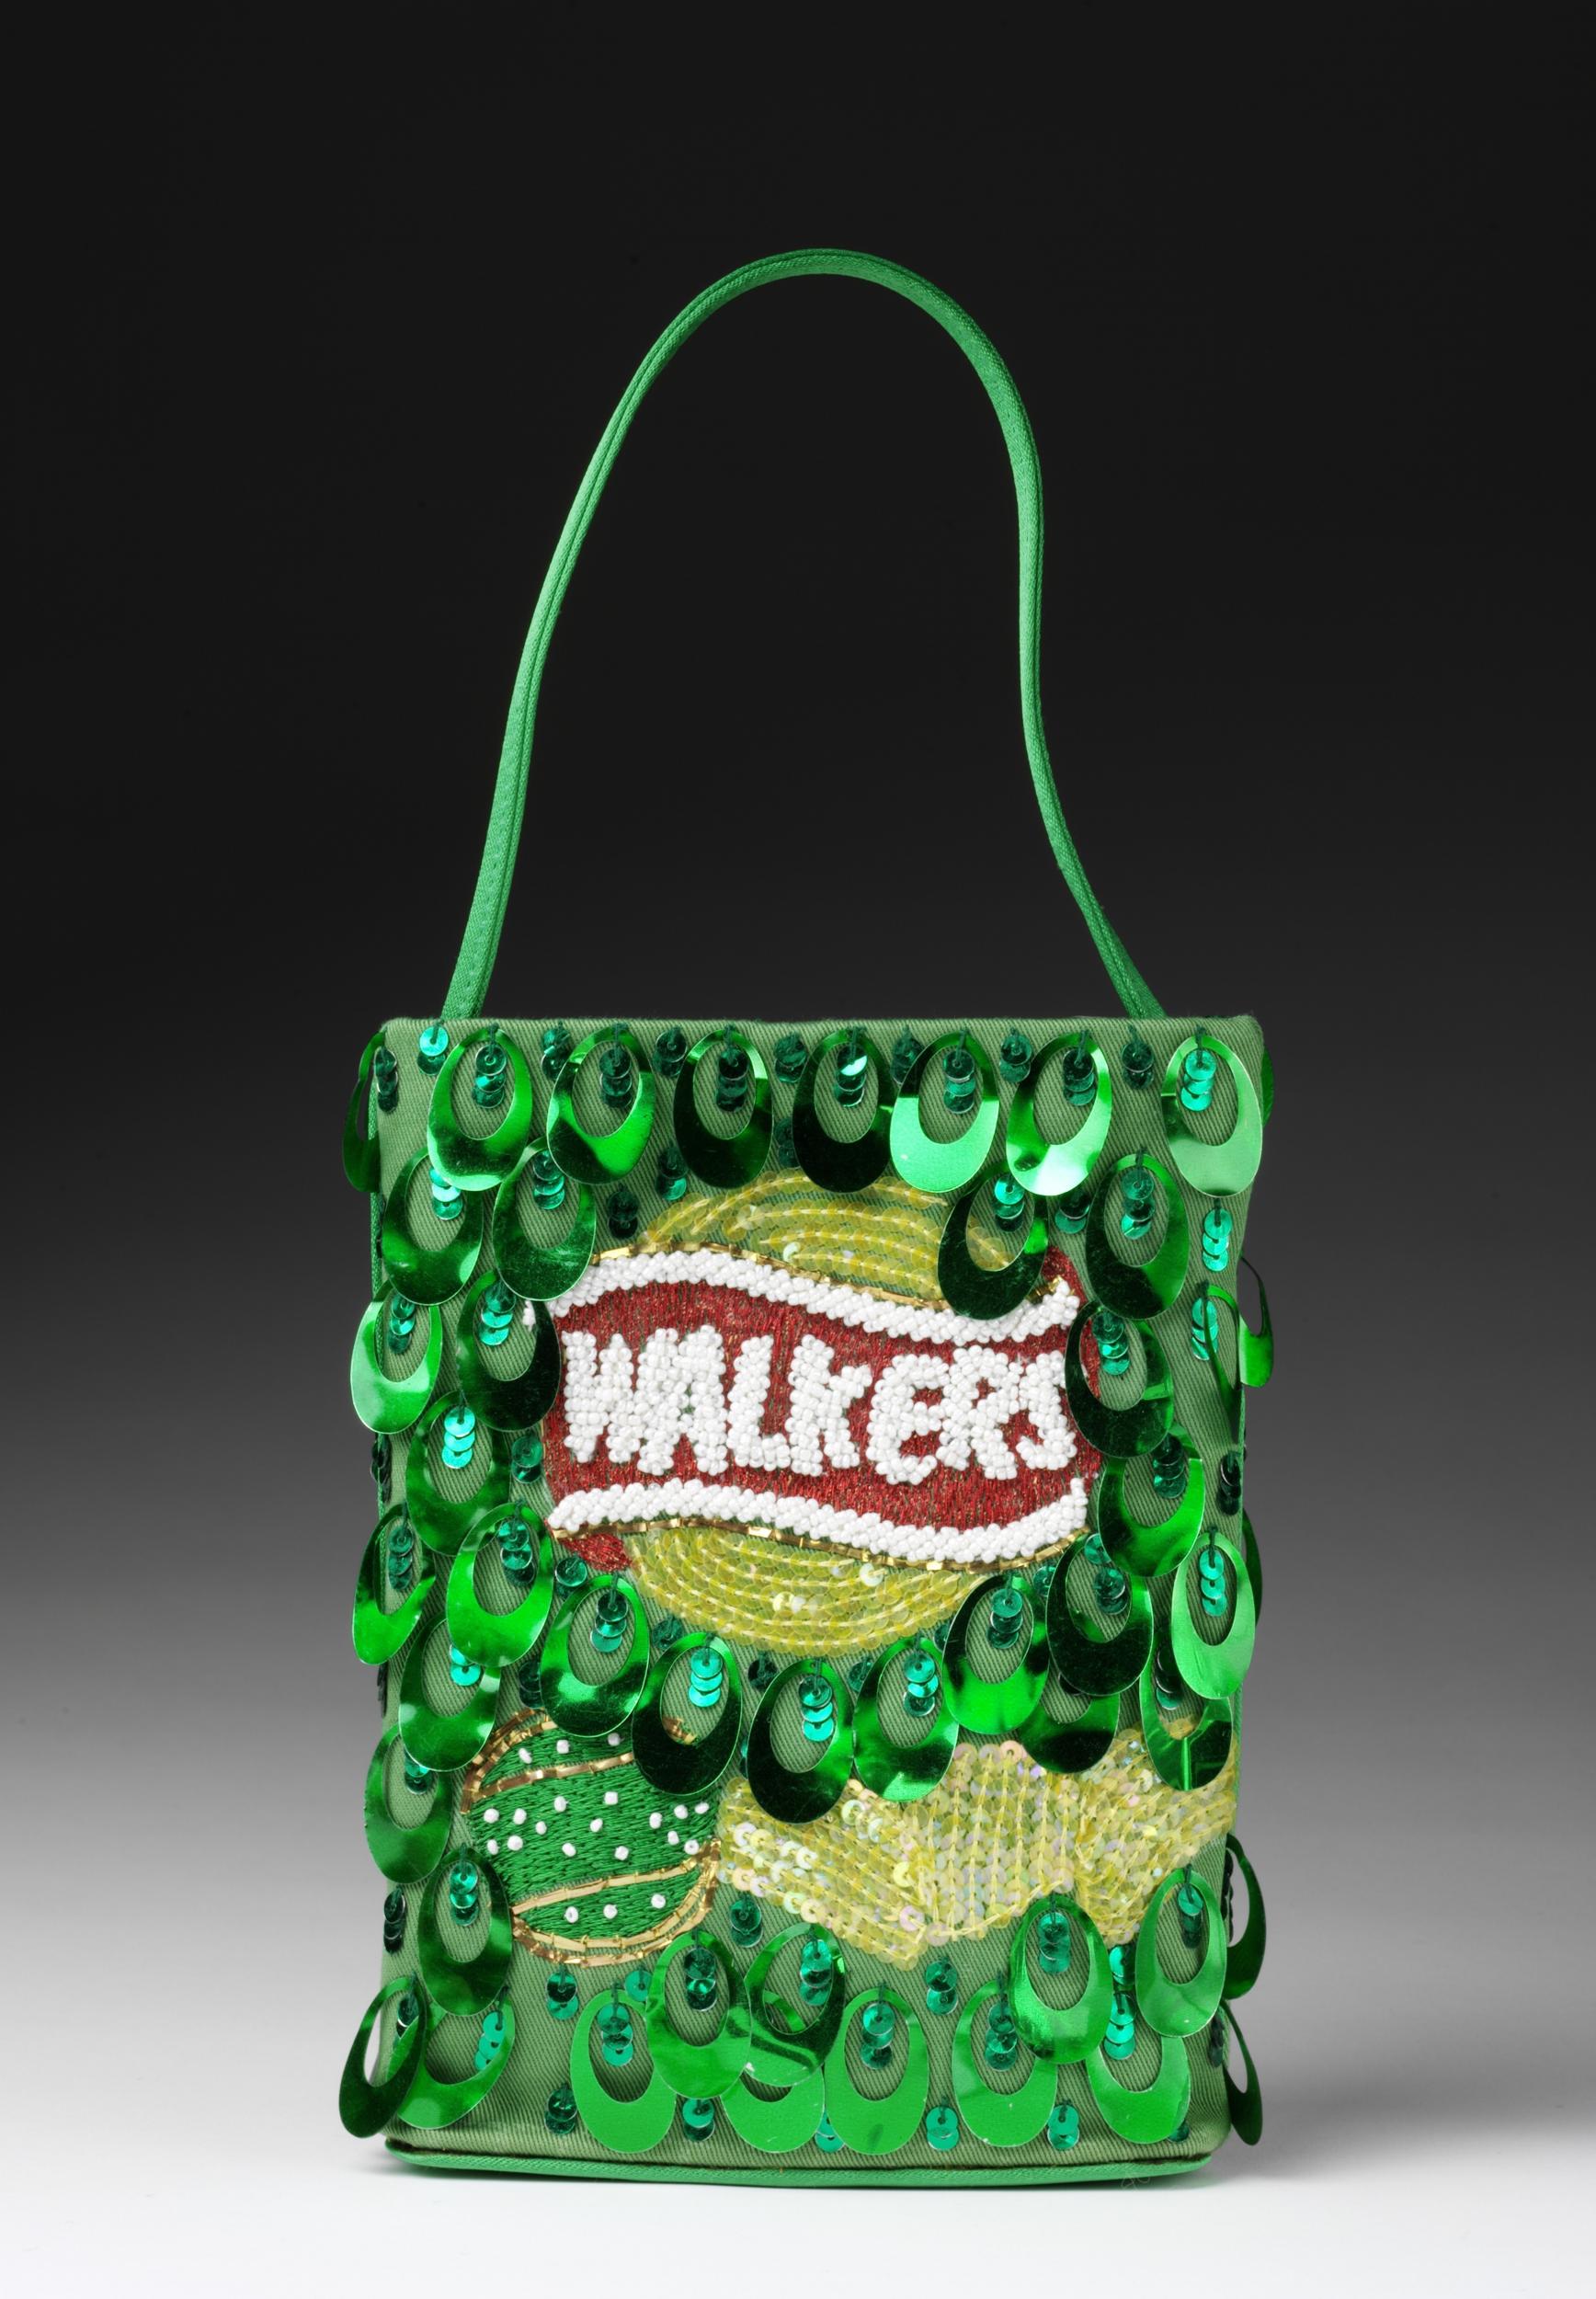 Anya Hindmarch's 'Walker Crisps' sequin and bead embroidered bag, London 2000